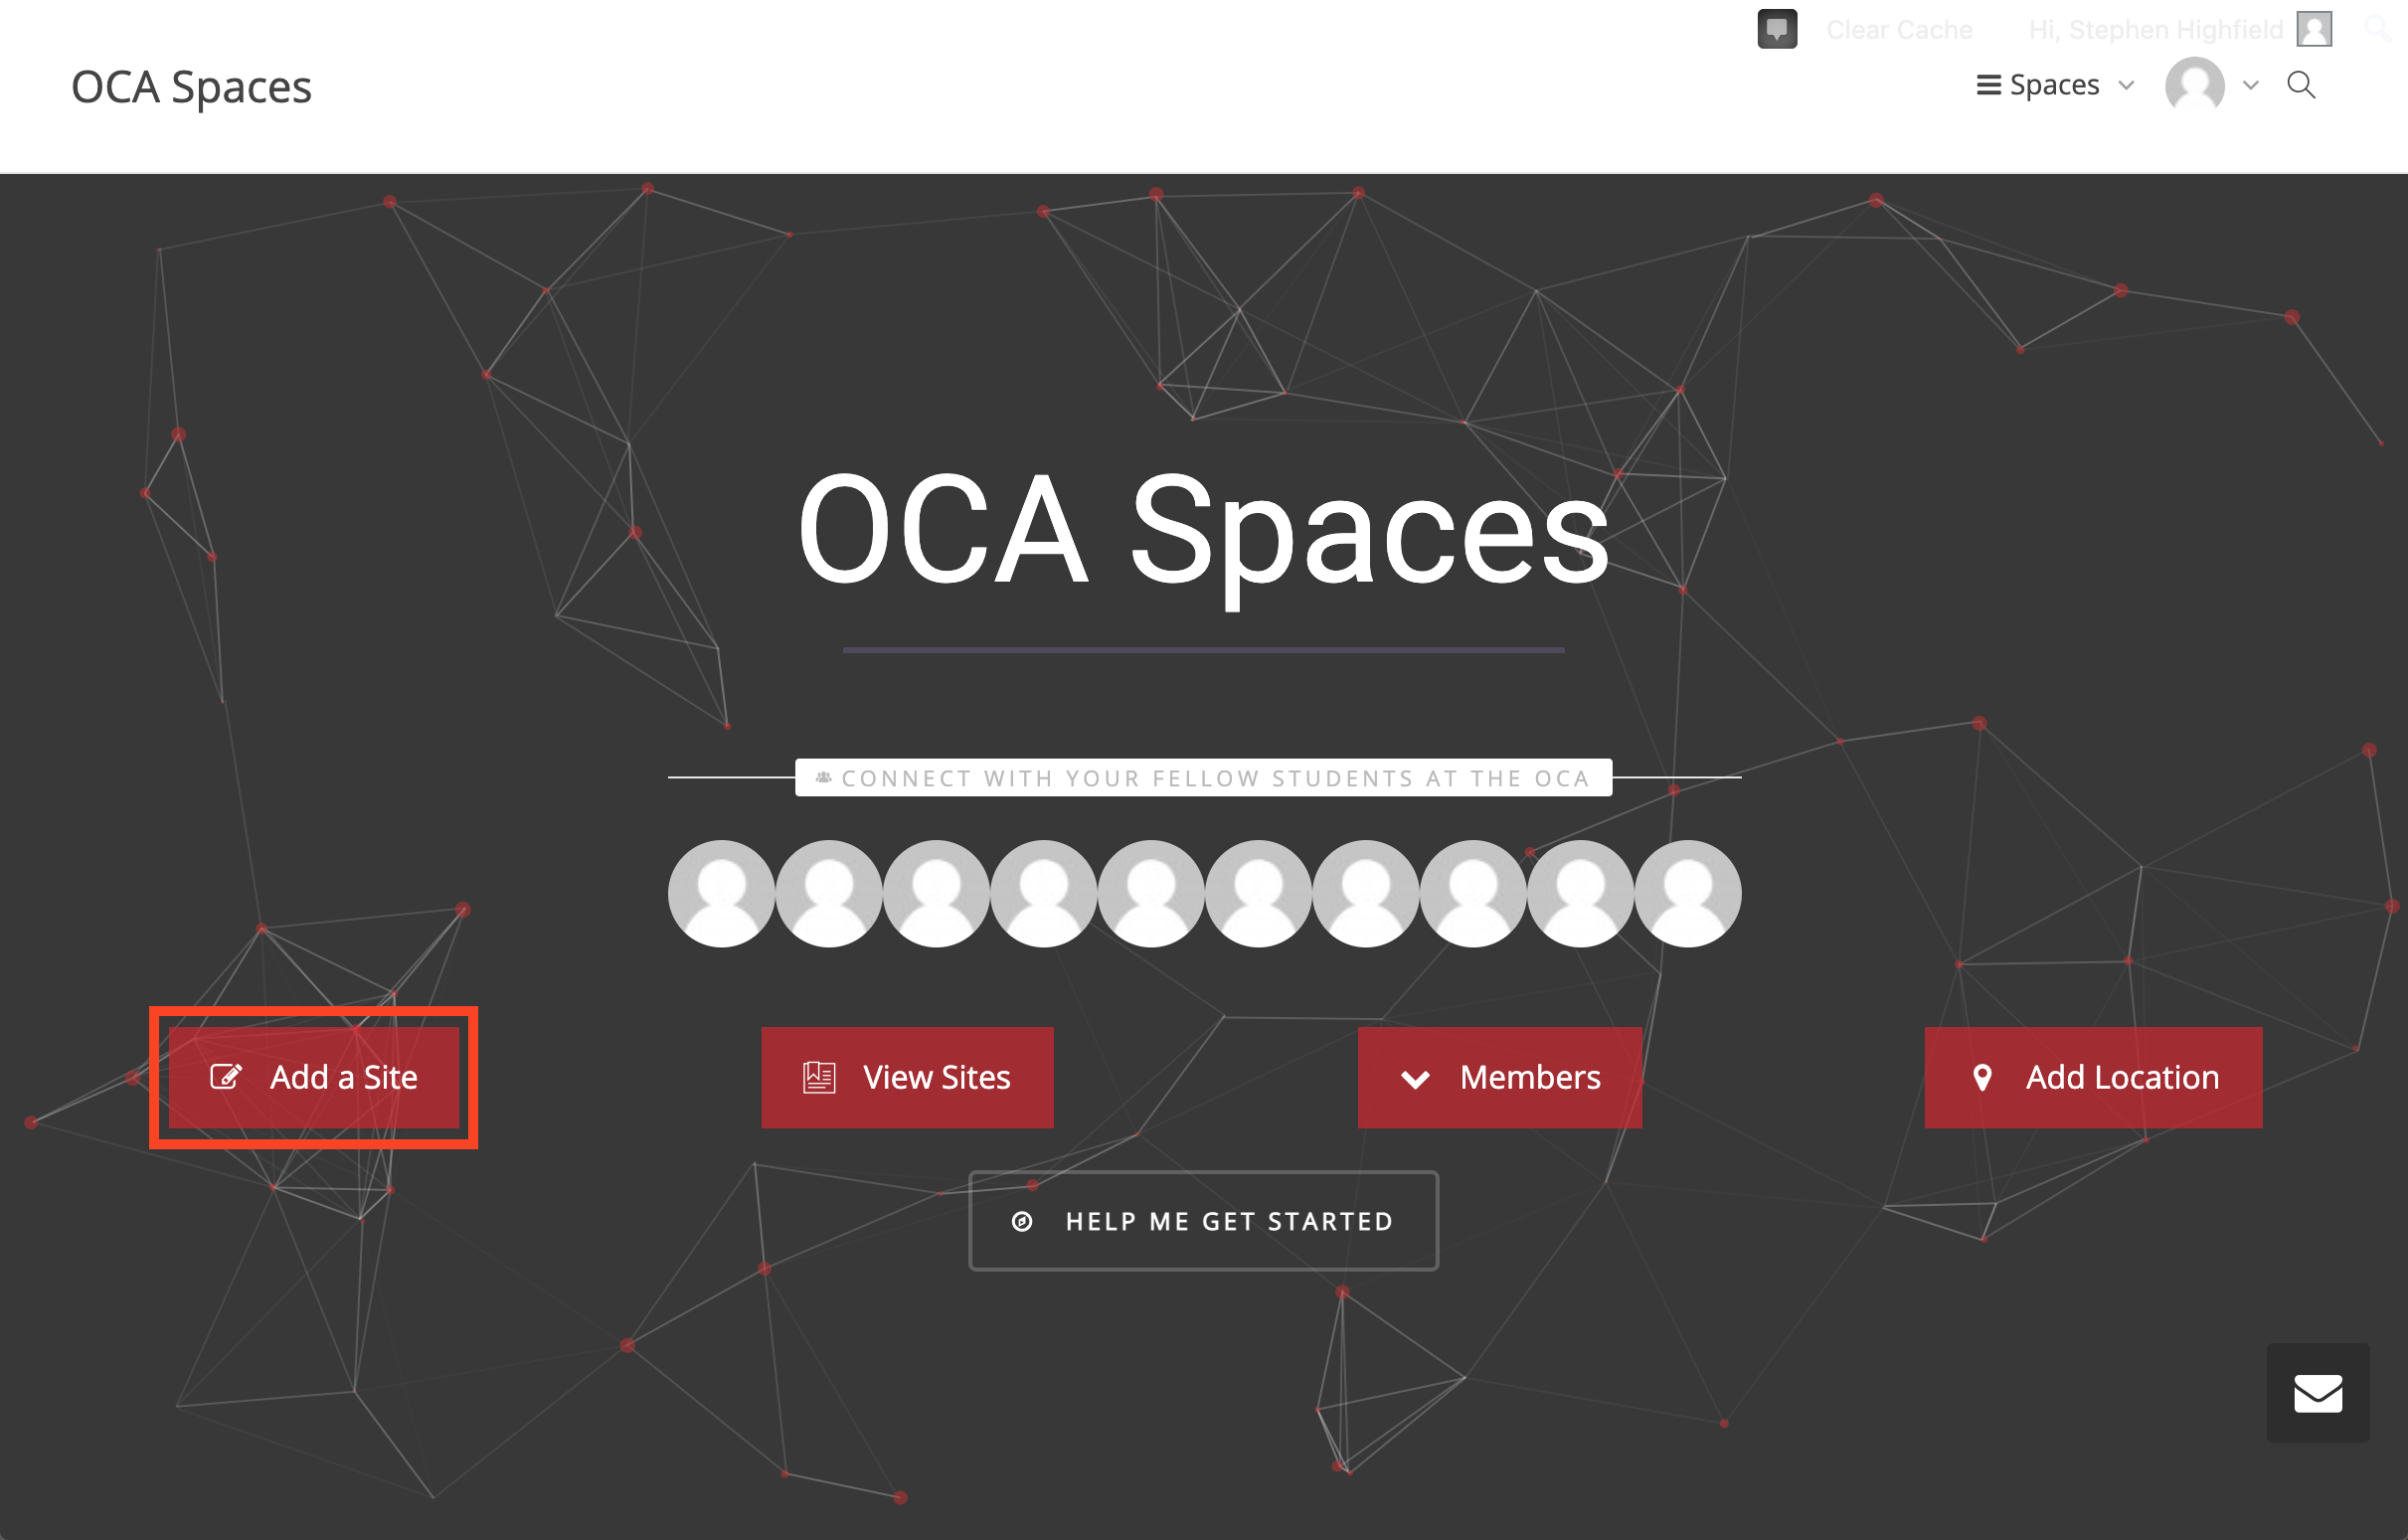 OCA Spaces homepage with the 'Add a Site' option highlighted using a red rectangle.